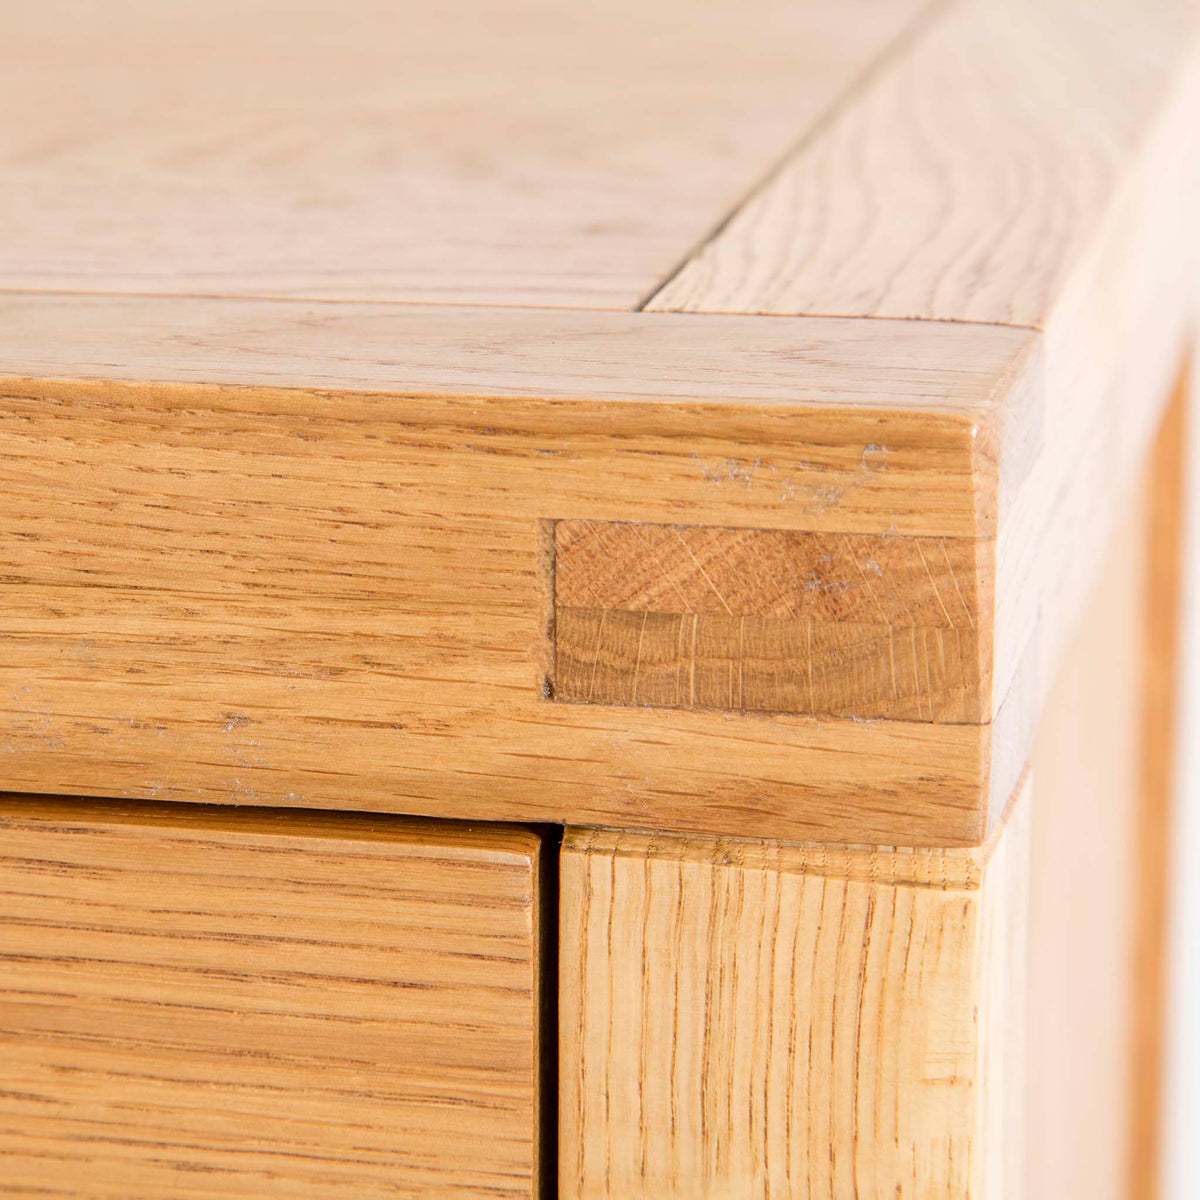 Abbey Waxed 3 Drawer Small Oak Bedside Table - Close up of corner tenon joint